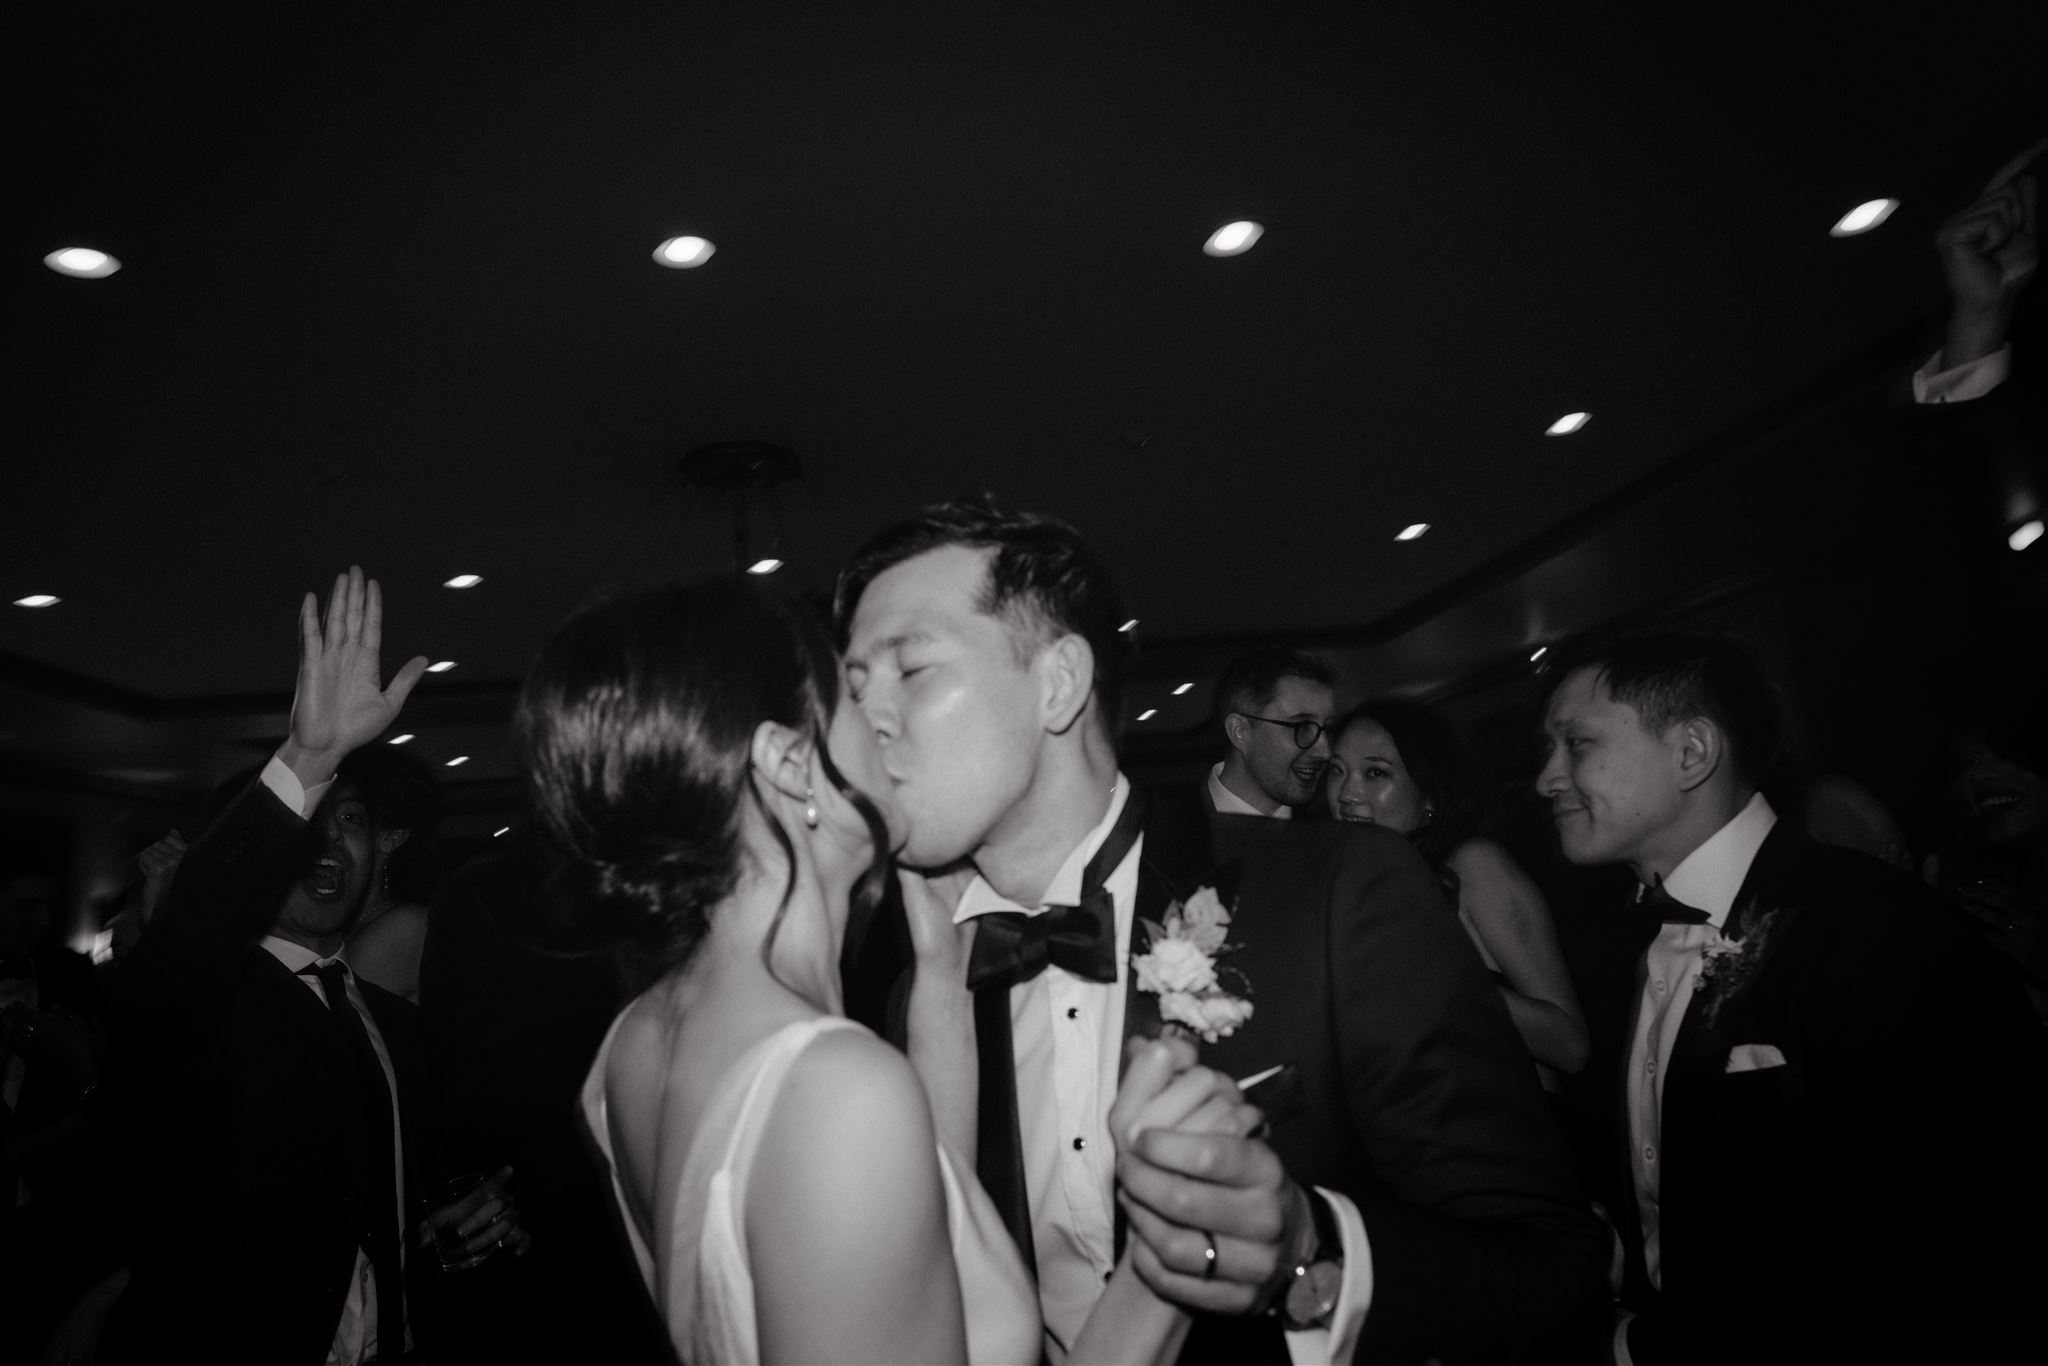 The newlyweds are lovingly kissing each other on the dance floor in the wedding reception. Photojournalistic Wedding Photography image by Jenny Fu Studio